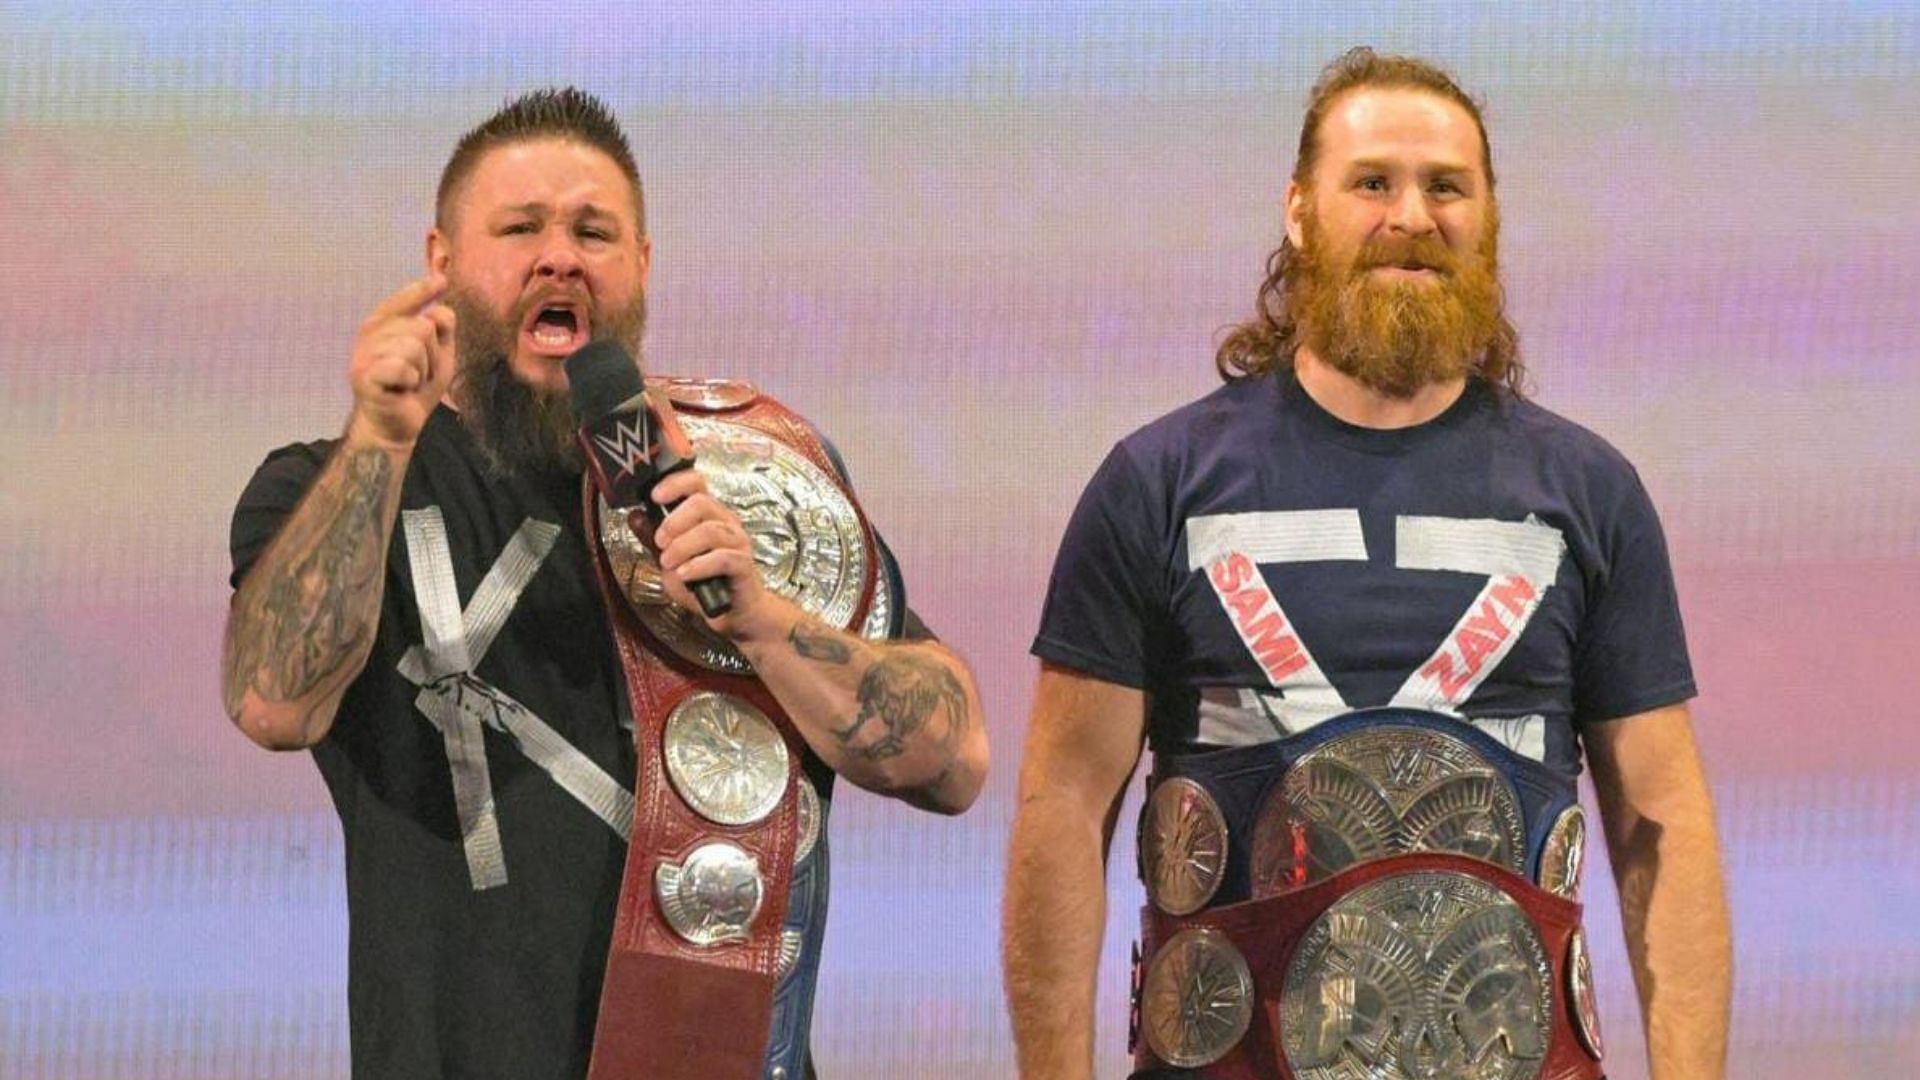 Kevin Owens (left) and Sami Zayn (right).